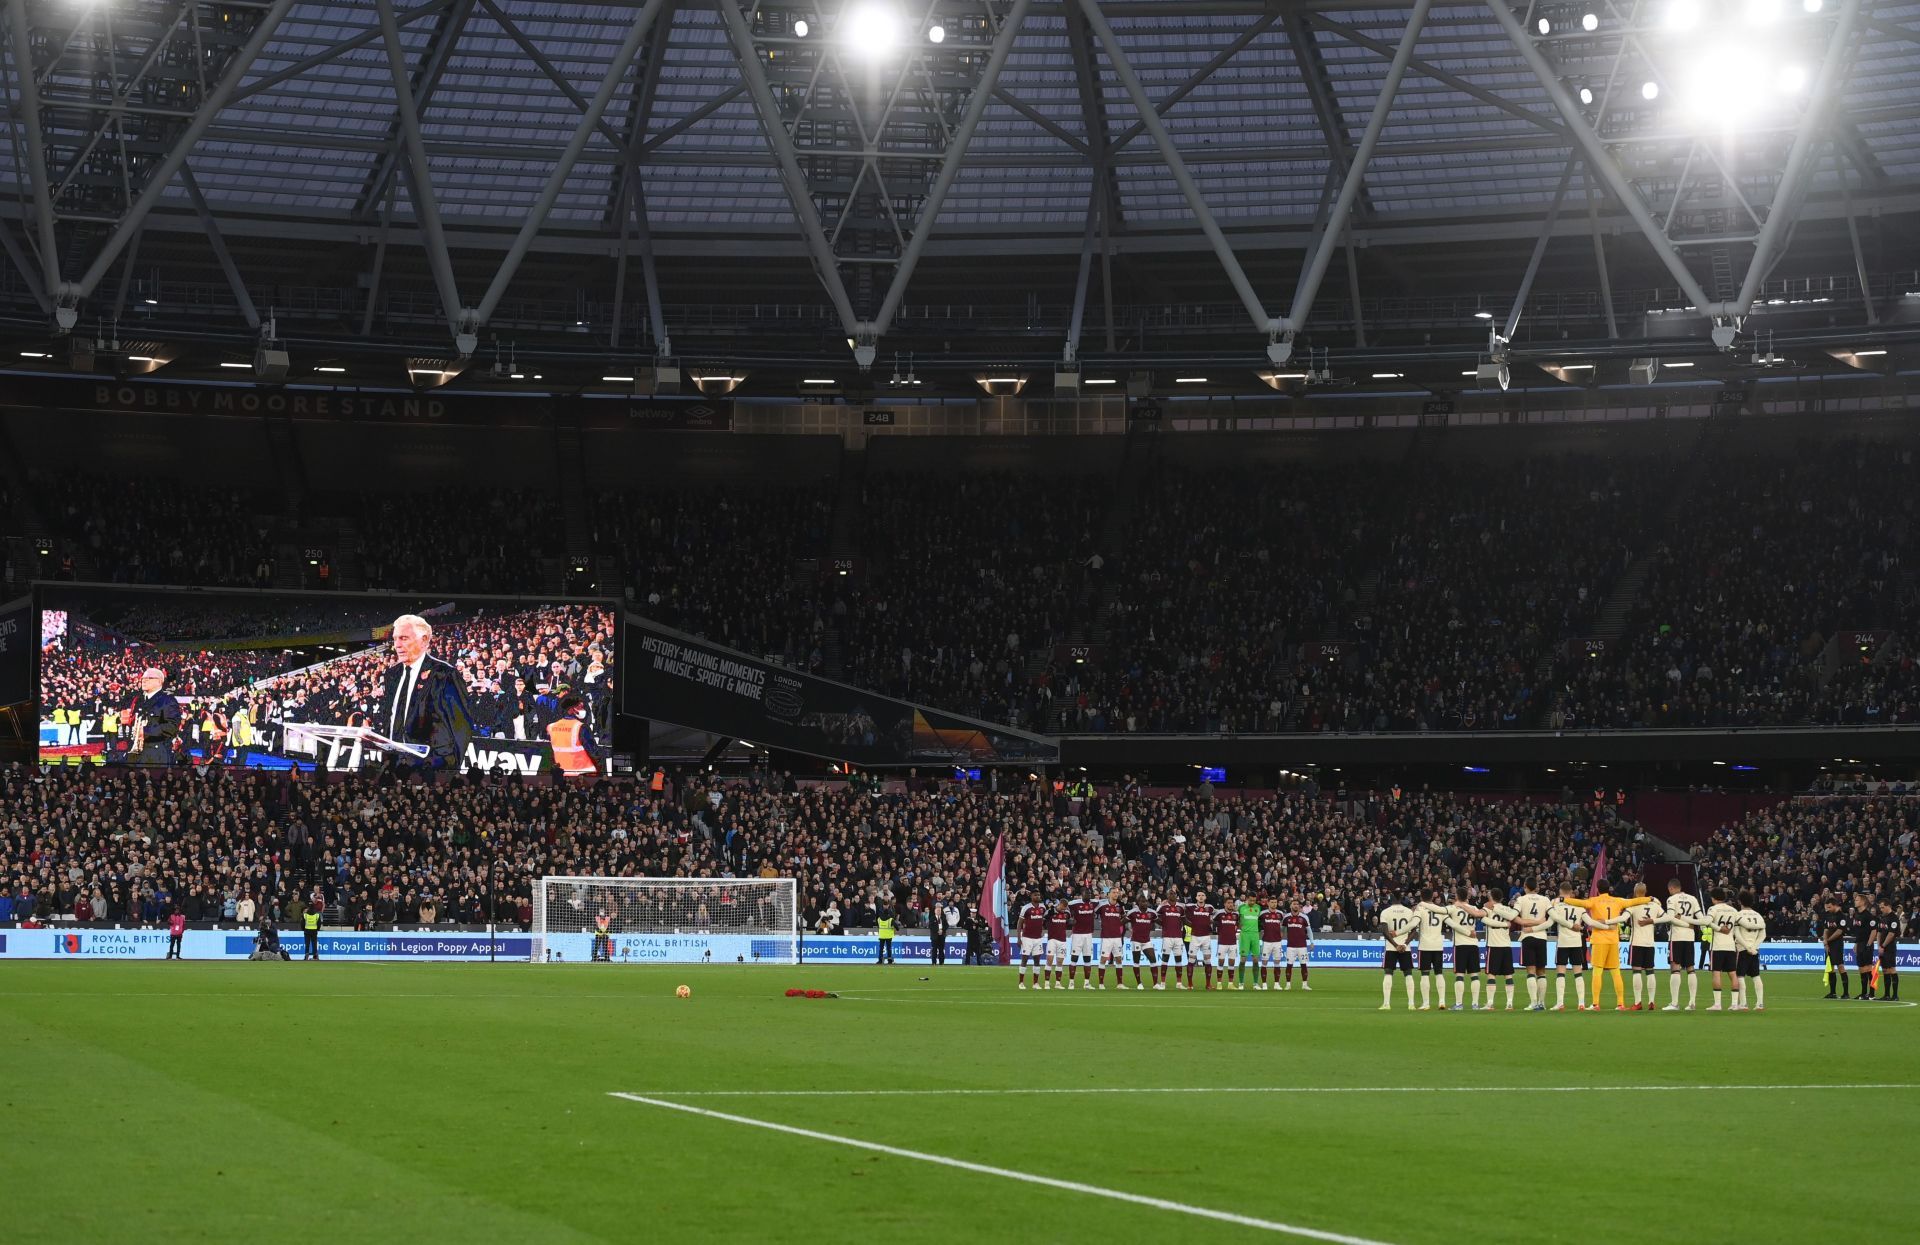 West Ham fans have provided the Hammers with extraordinary support in the Premier League